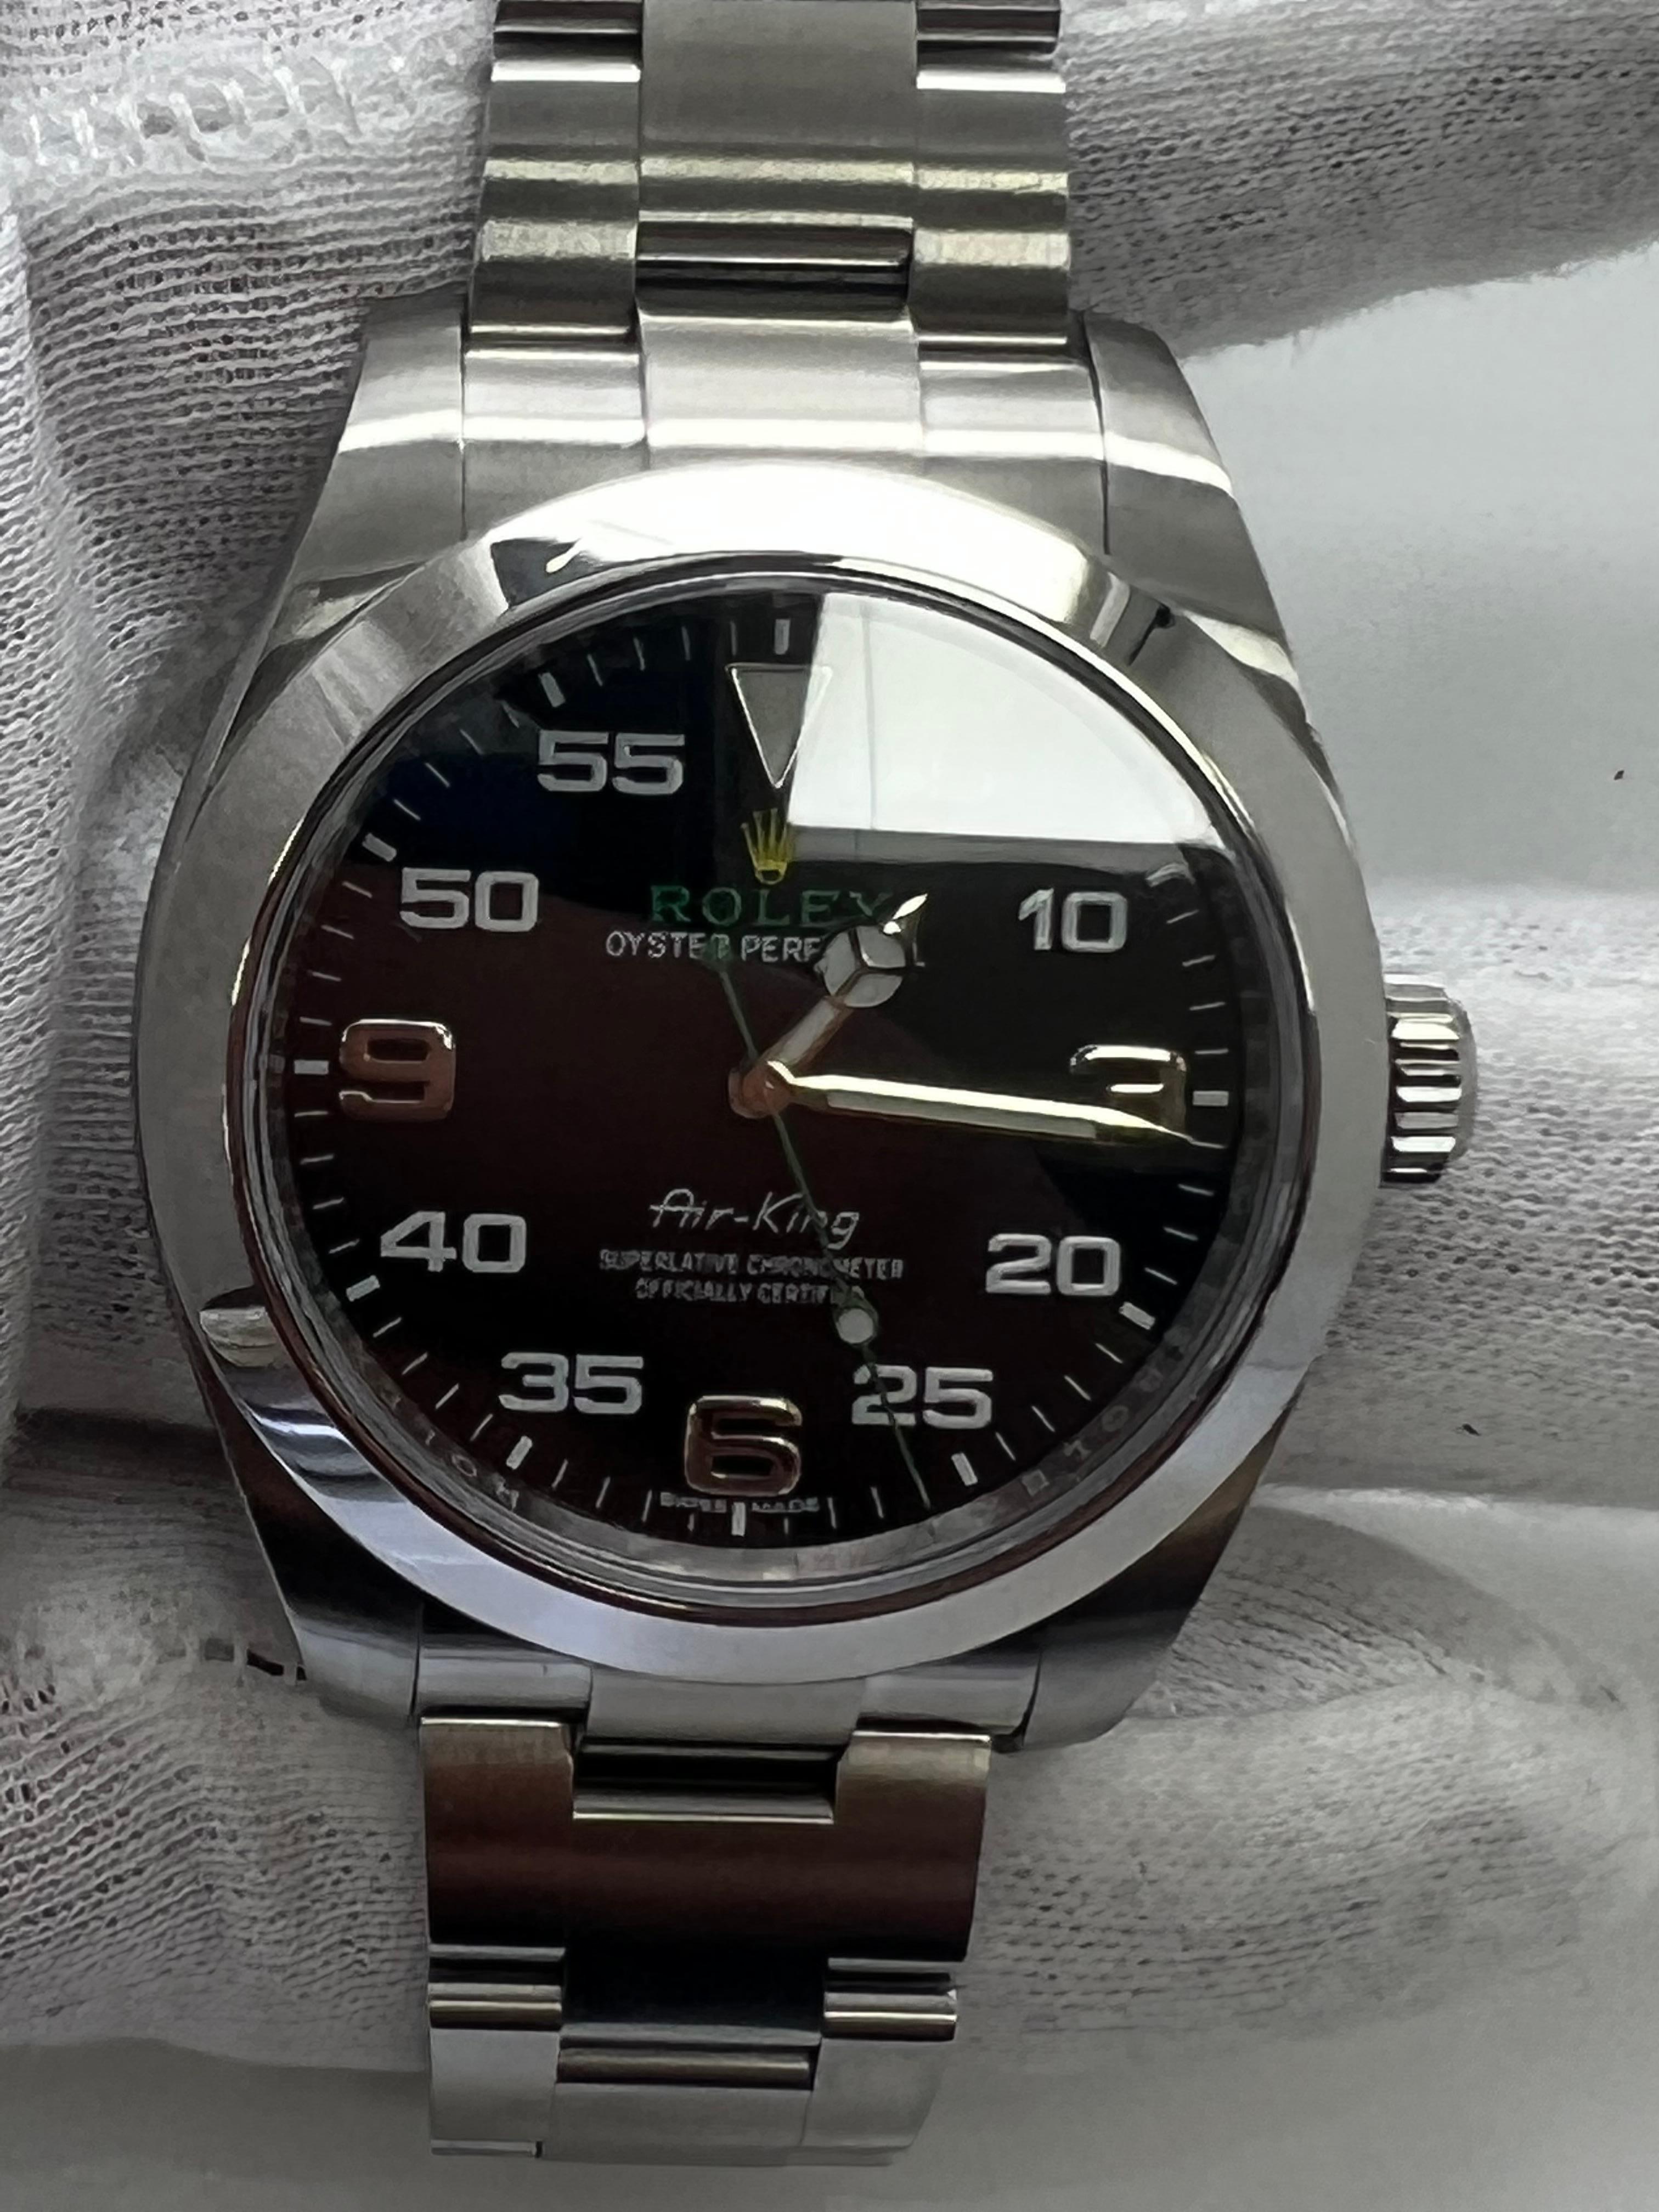 Rolex Air-King Automatic 40mm Steel Mens Oyster Bracelet Watch 116900
2017  

excellent condition

original box and papers

all original Rolex Parts

2 year warranty

shop with confidence

Evita Diamonds & Timepieces